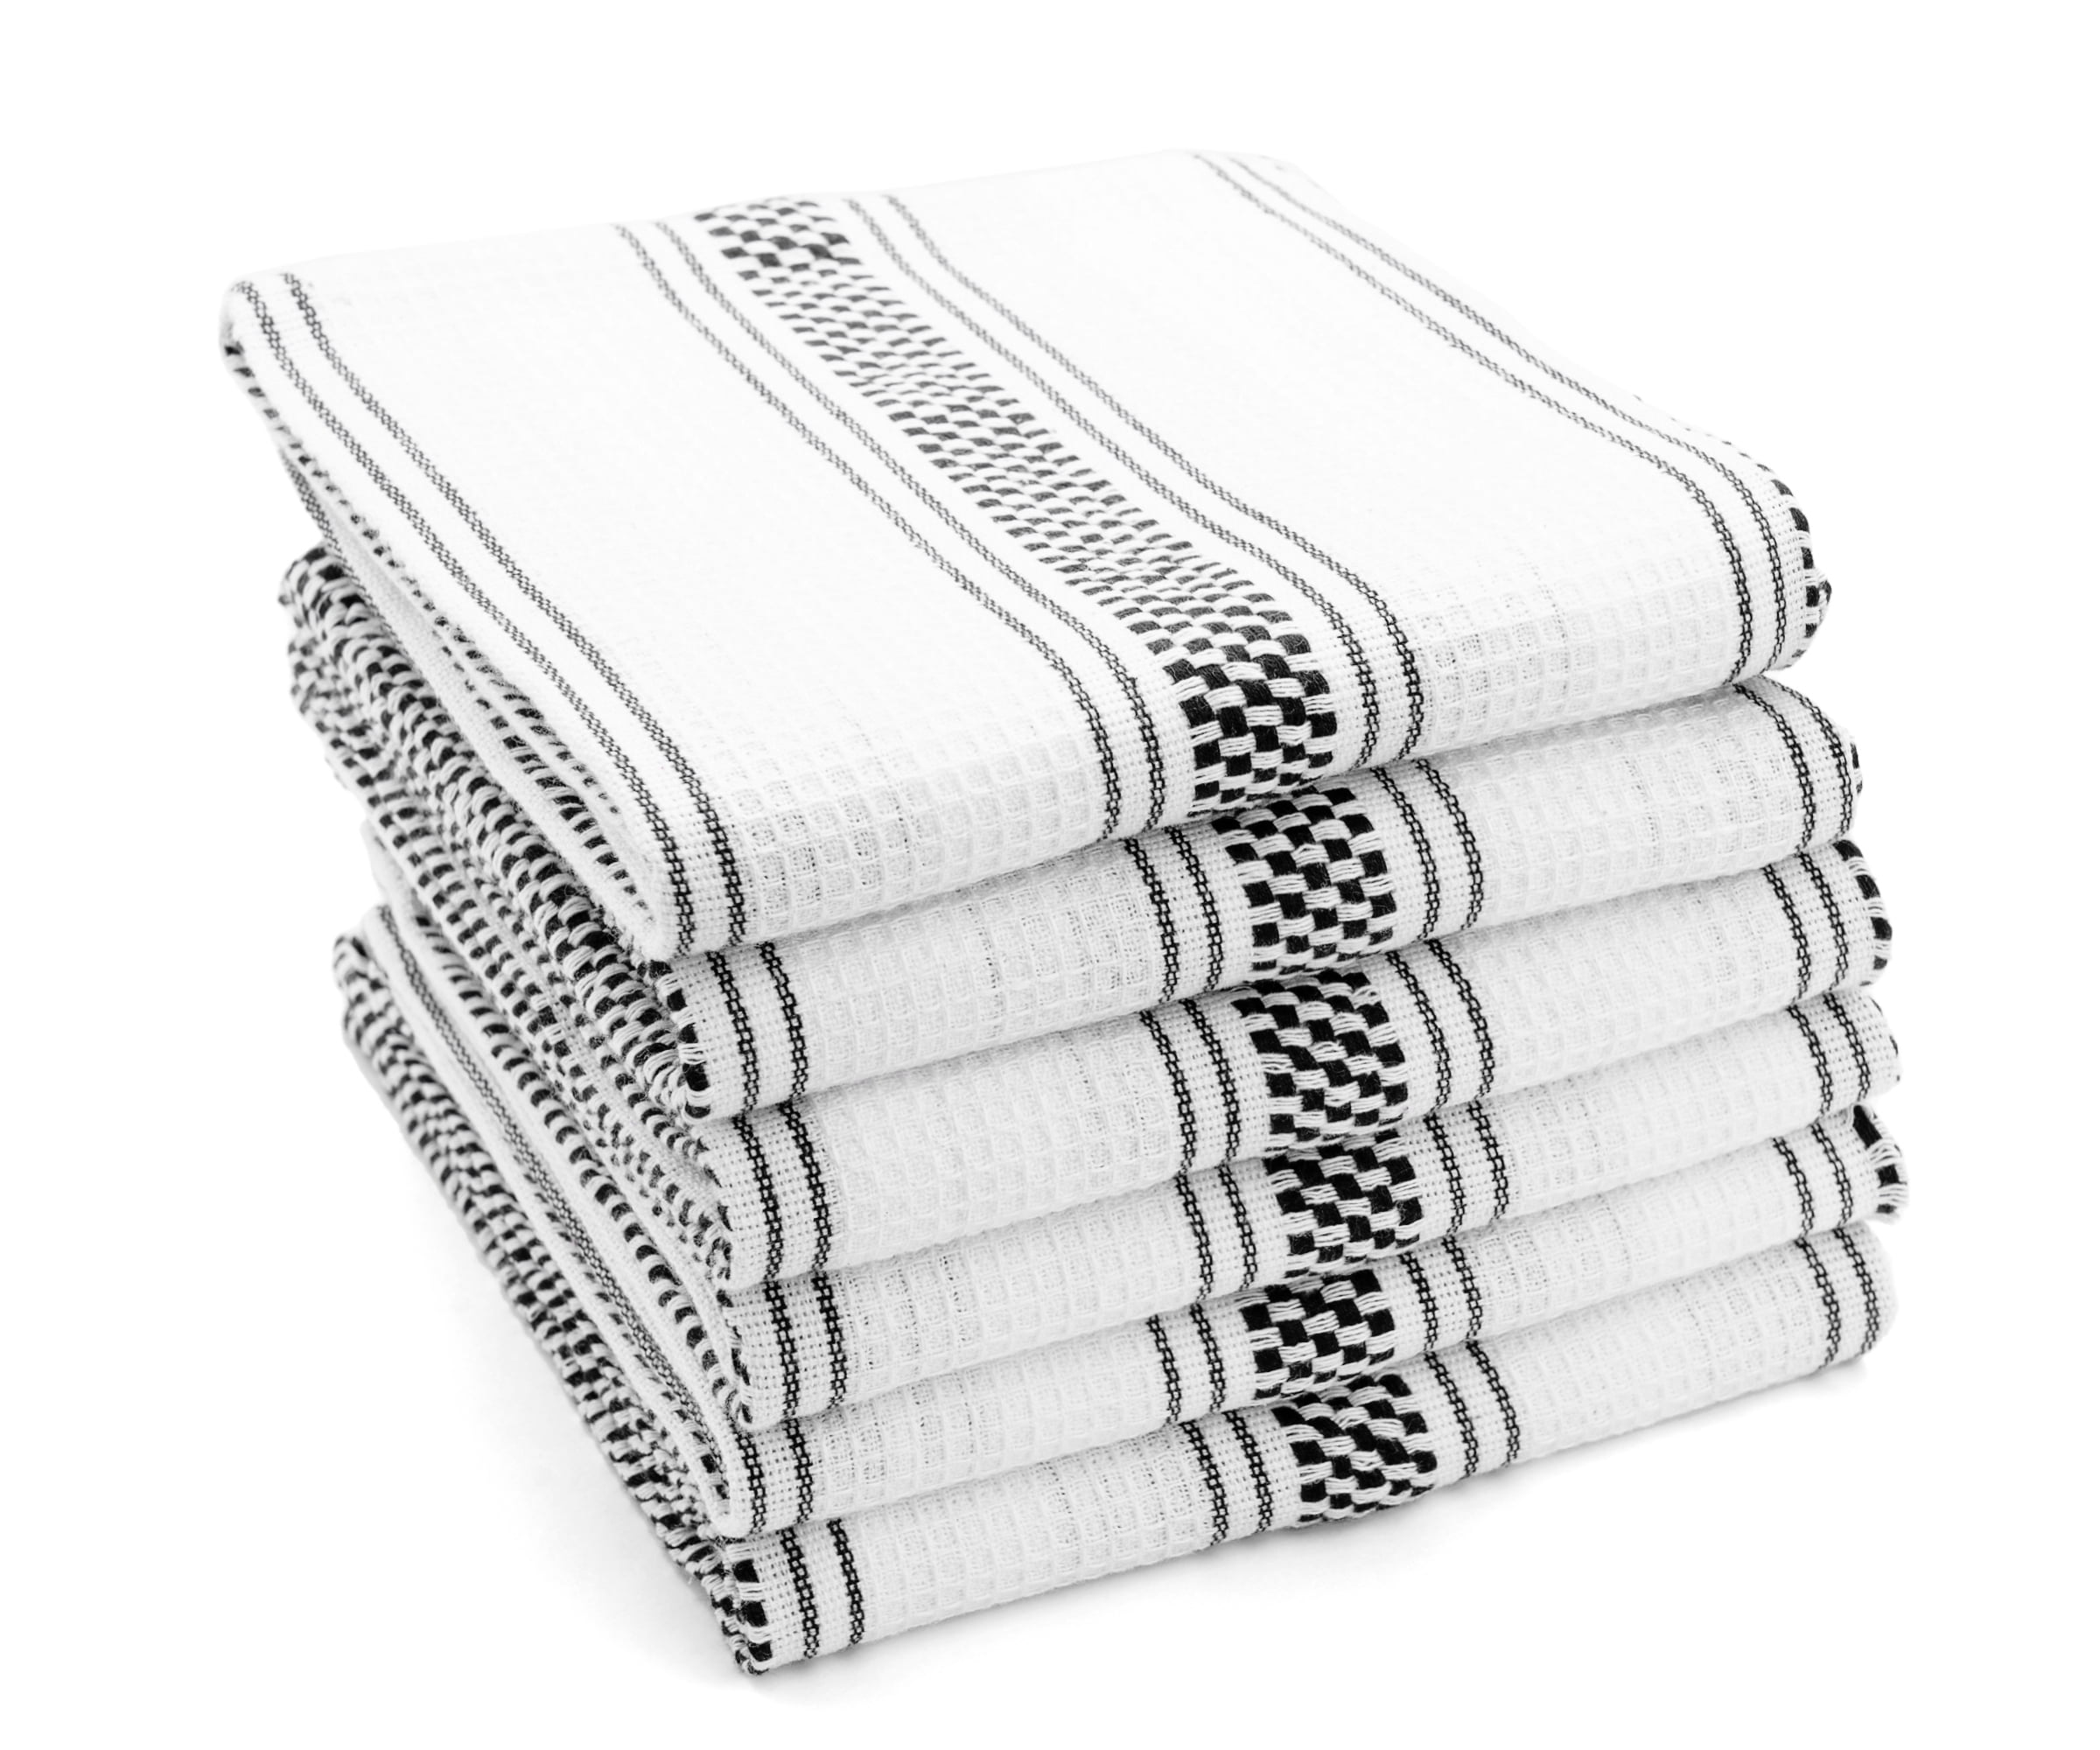 15 x 26 Bleach Safe Square Design Kitchen Towel - 6 Piece Black and White Set. 100% Cotton Made, Super Absorbent & 30% Thicker Than Economy Towel.